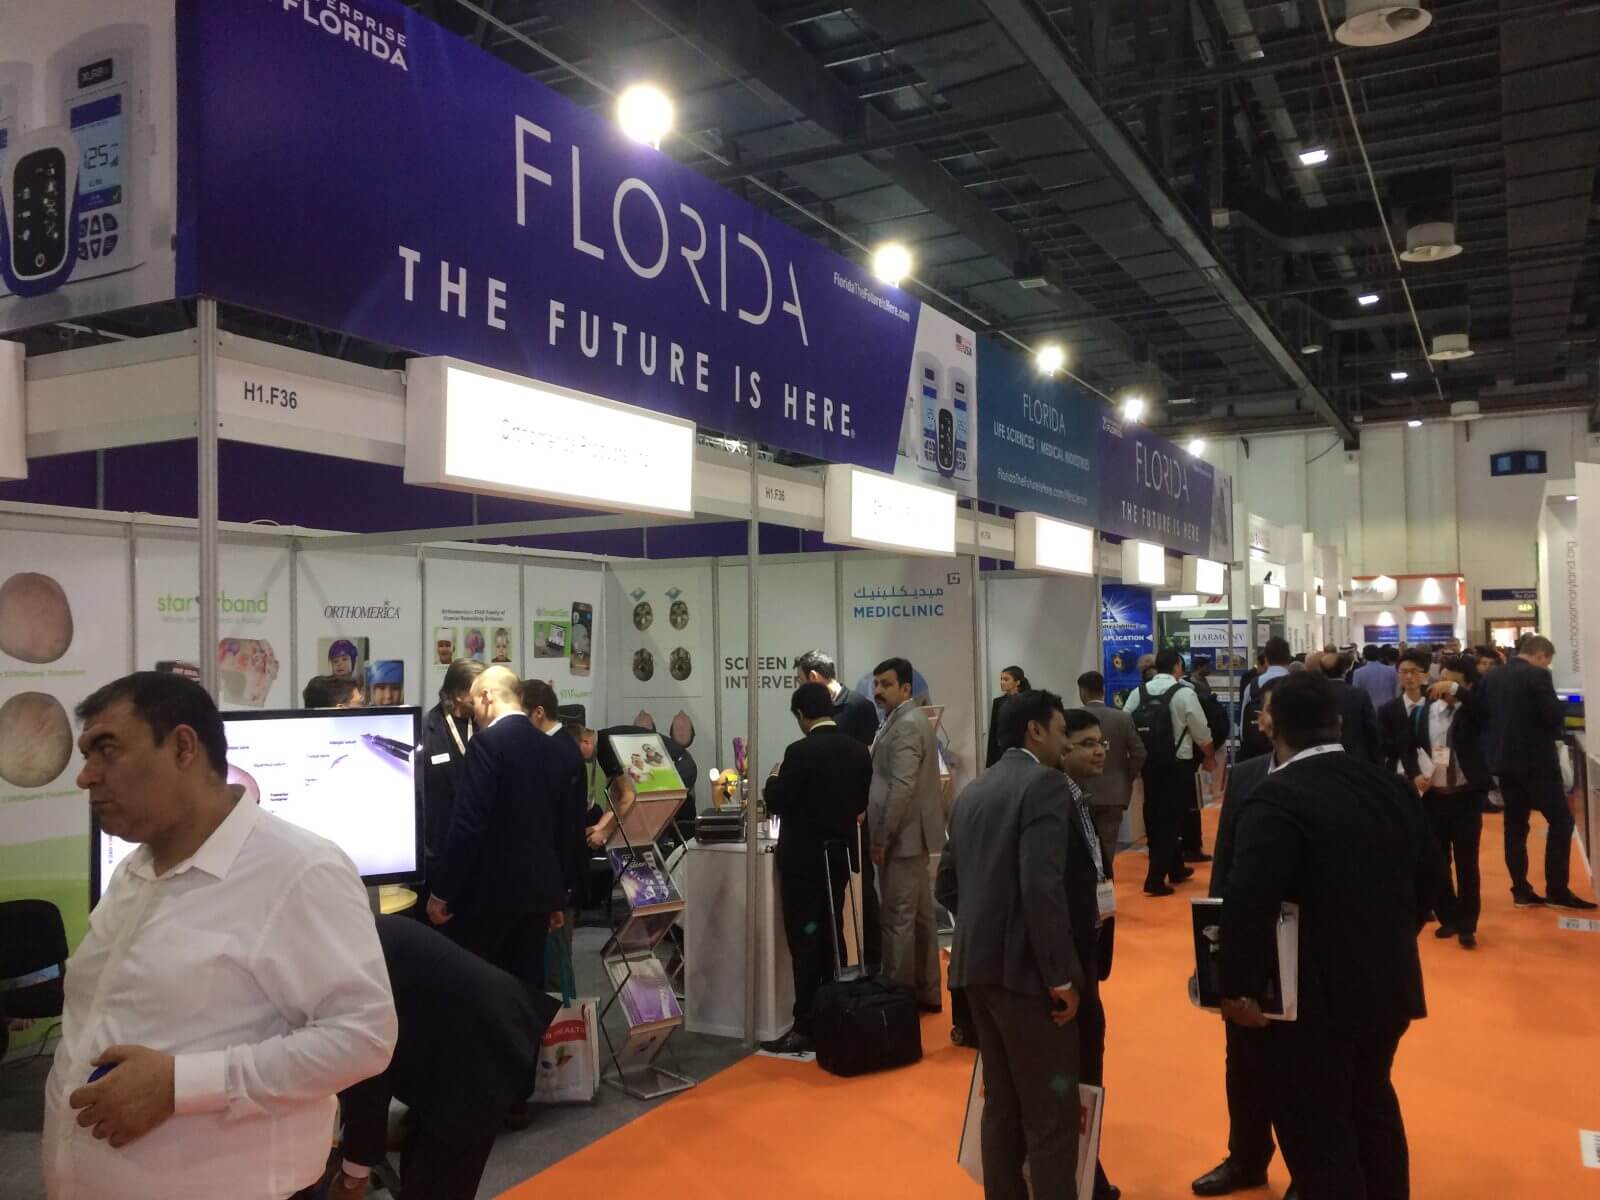 Record Number of Companies Report More than $69 Million in Export Sales Following Arab Health